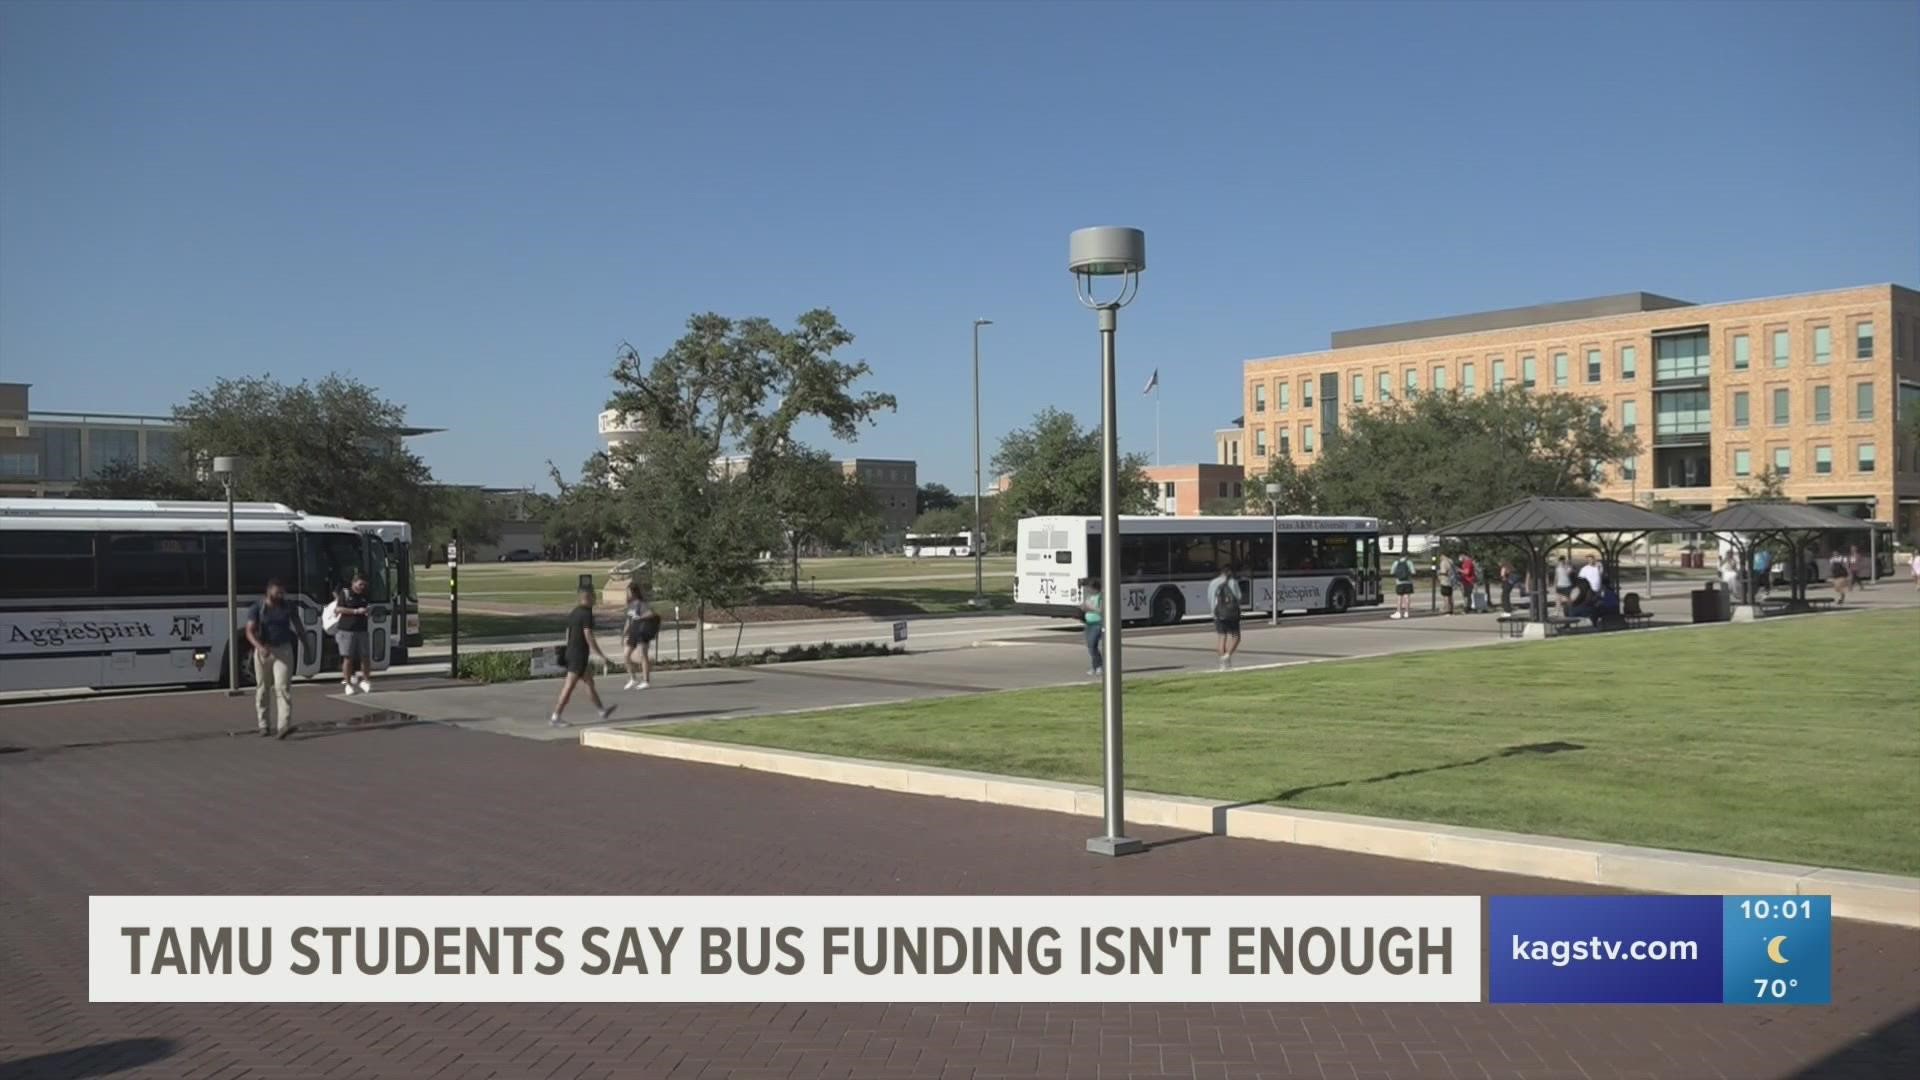 Despite receiving thousands of dollars from the county to bus students to City Hall, TAMU students think moving the voting location back on campus is the best option